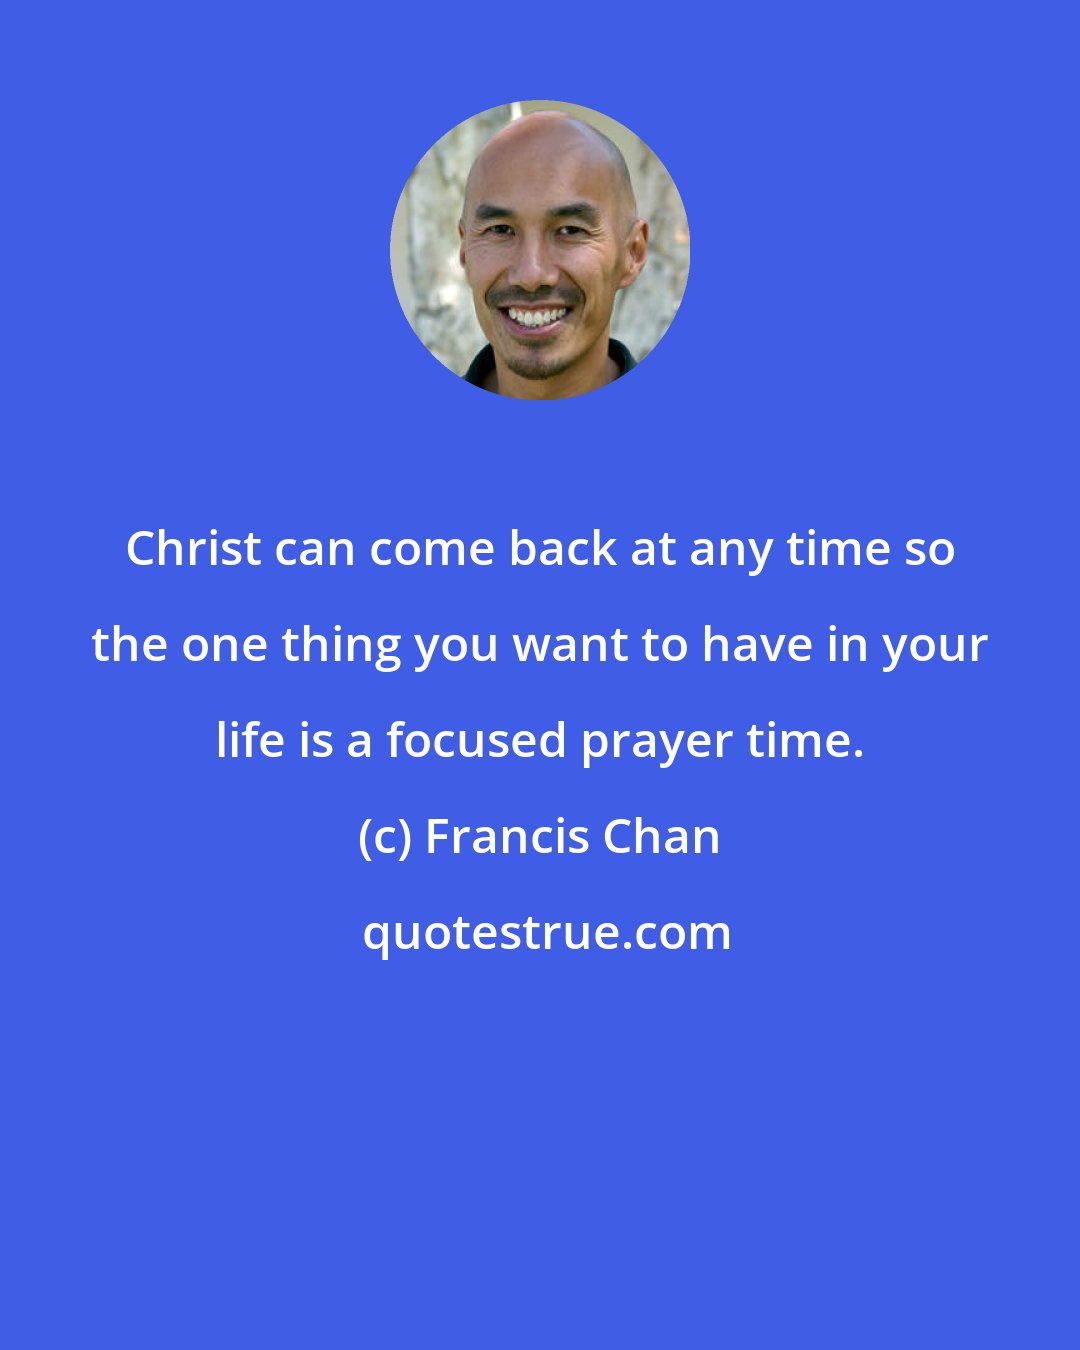 Francis Chan: Christ can come back at any time so the one thing you want to have in your life is a focused prayer time.